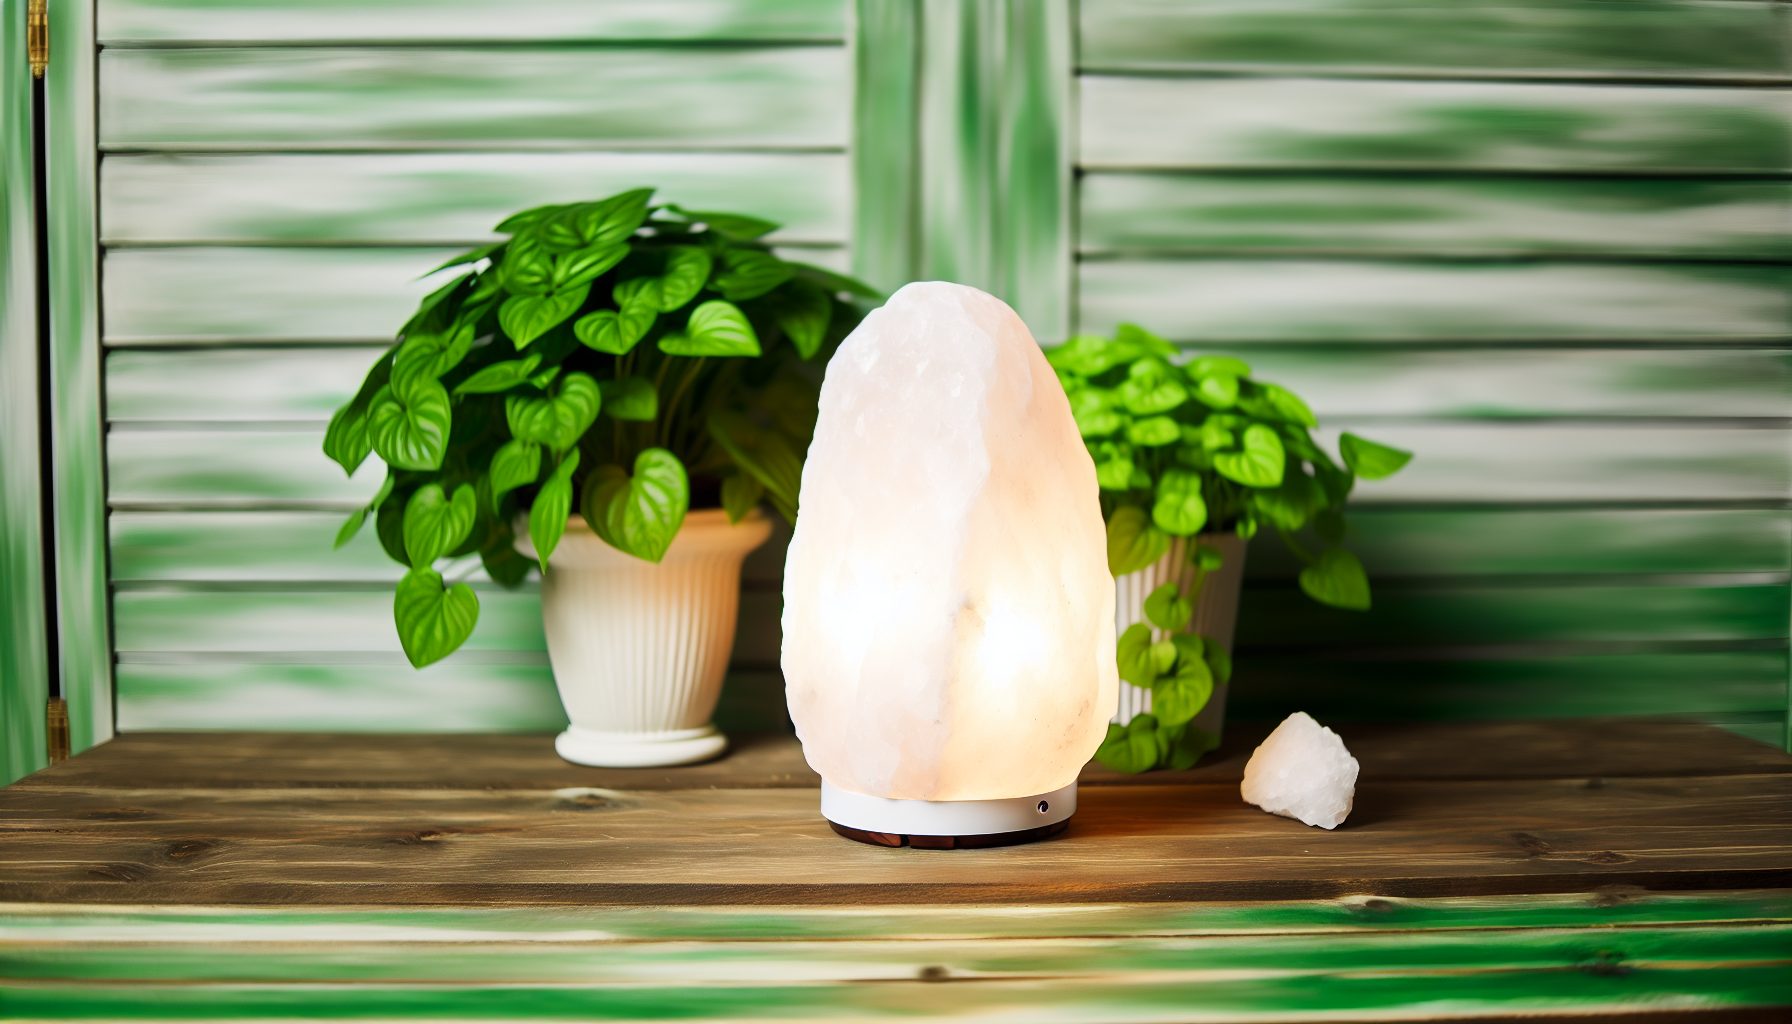 A white Himalayan salt lamp as a centerpiece on a wooden table surrounded by green plants